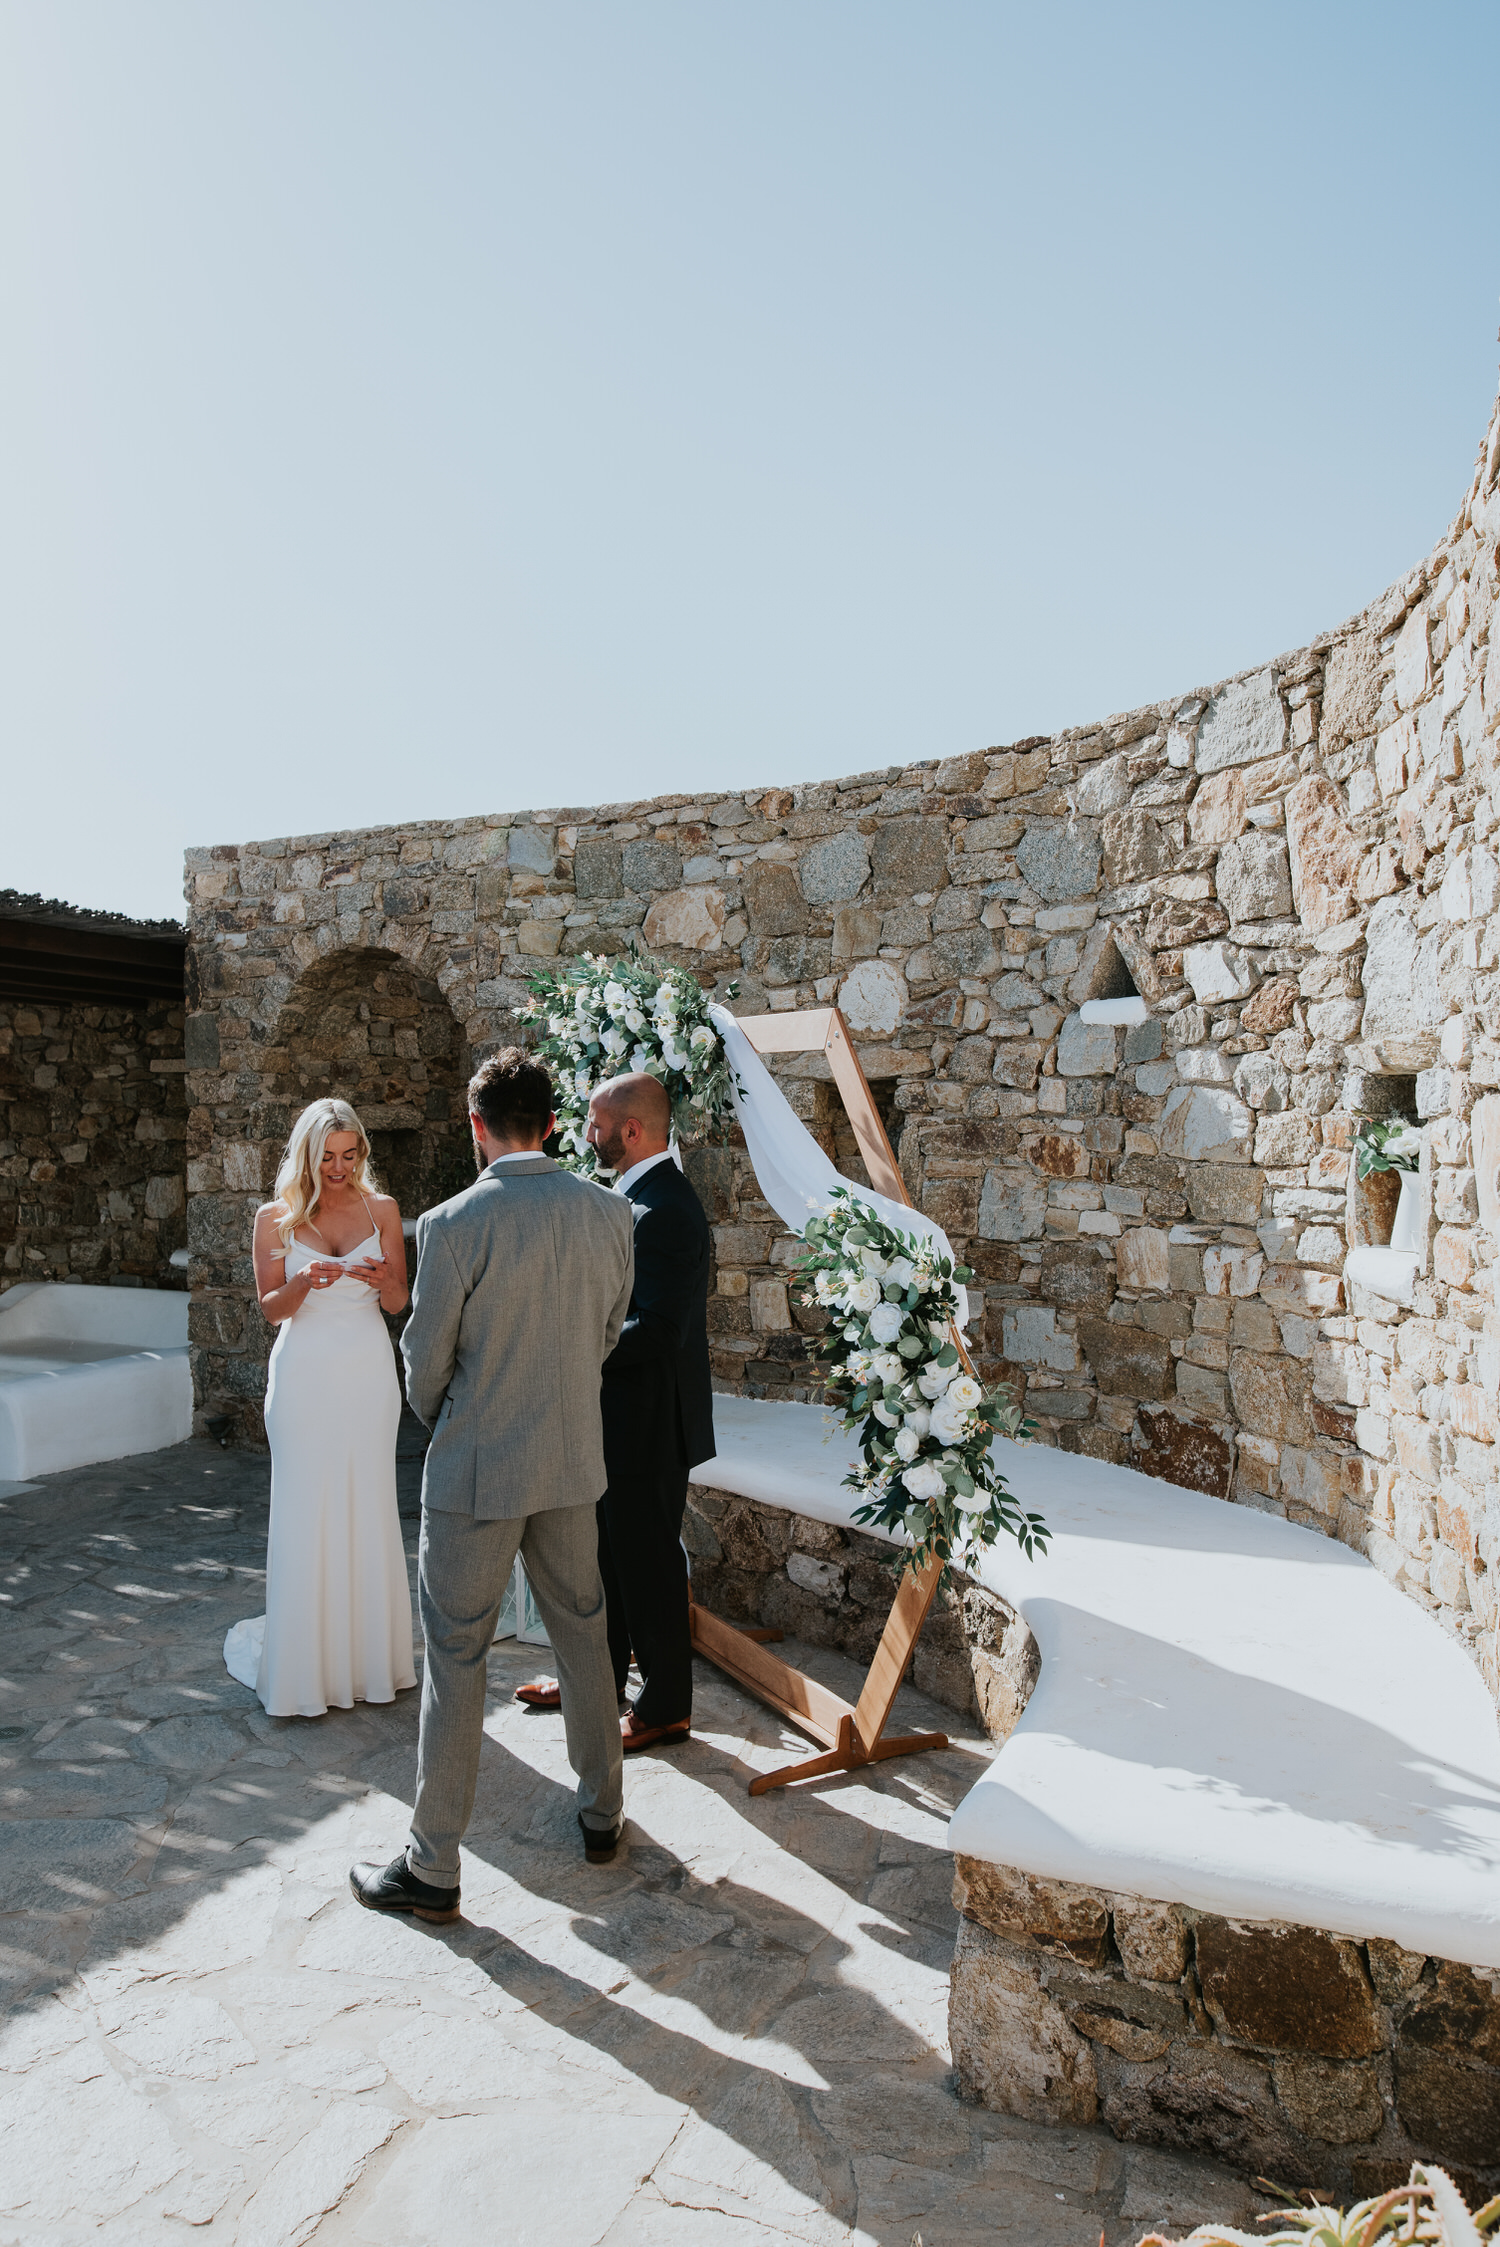 Mykonos wedding photographer: bride reading her vows as groom and celebrant watch her in front of the floral arch and the rock wall.